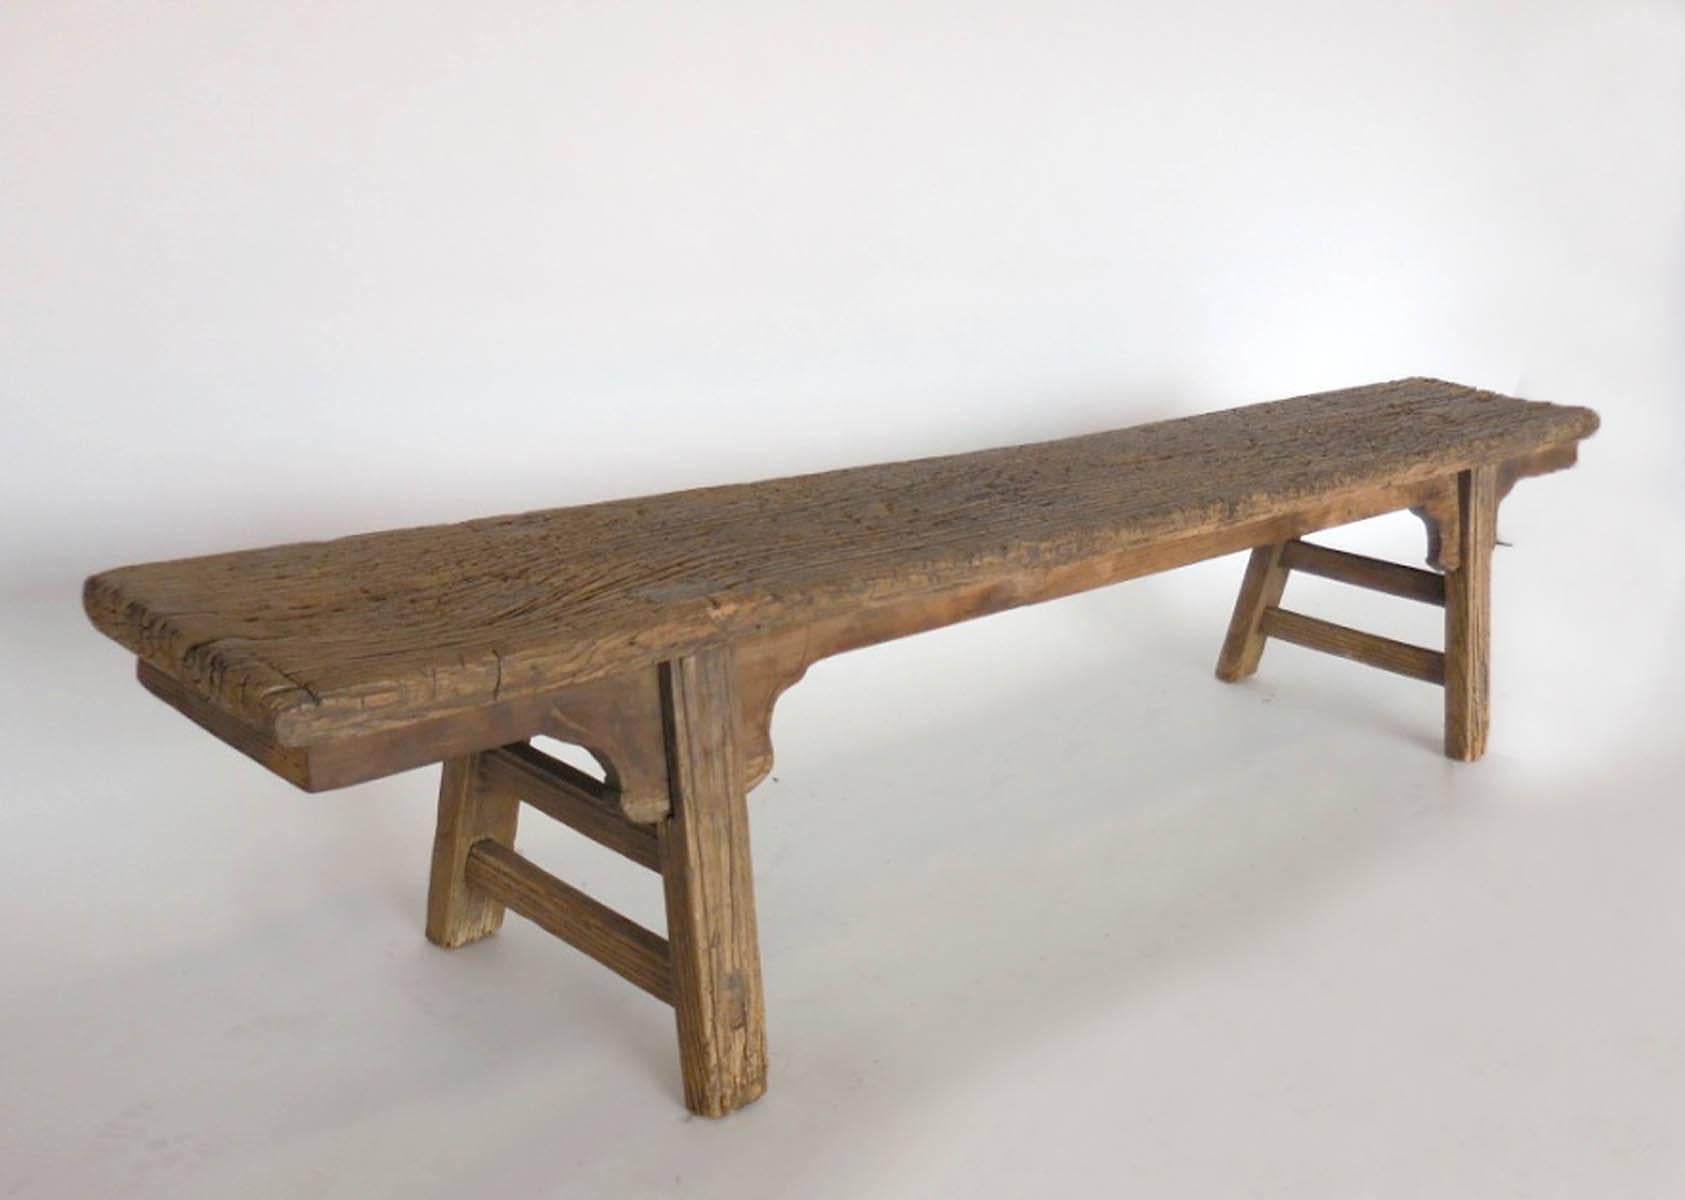 18th-19th century Chinese elm bench with dove tail construction and wooden nails. Decorative detail by legs. Rustic but delicate look. Sturdy and functional.
Weathered and smooth patina.